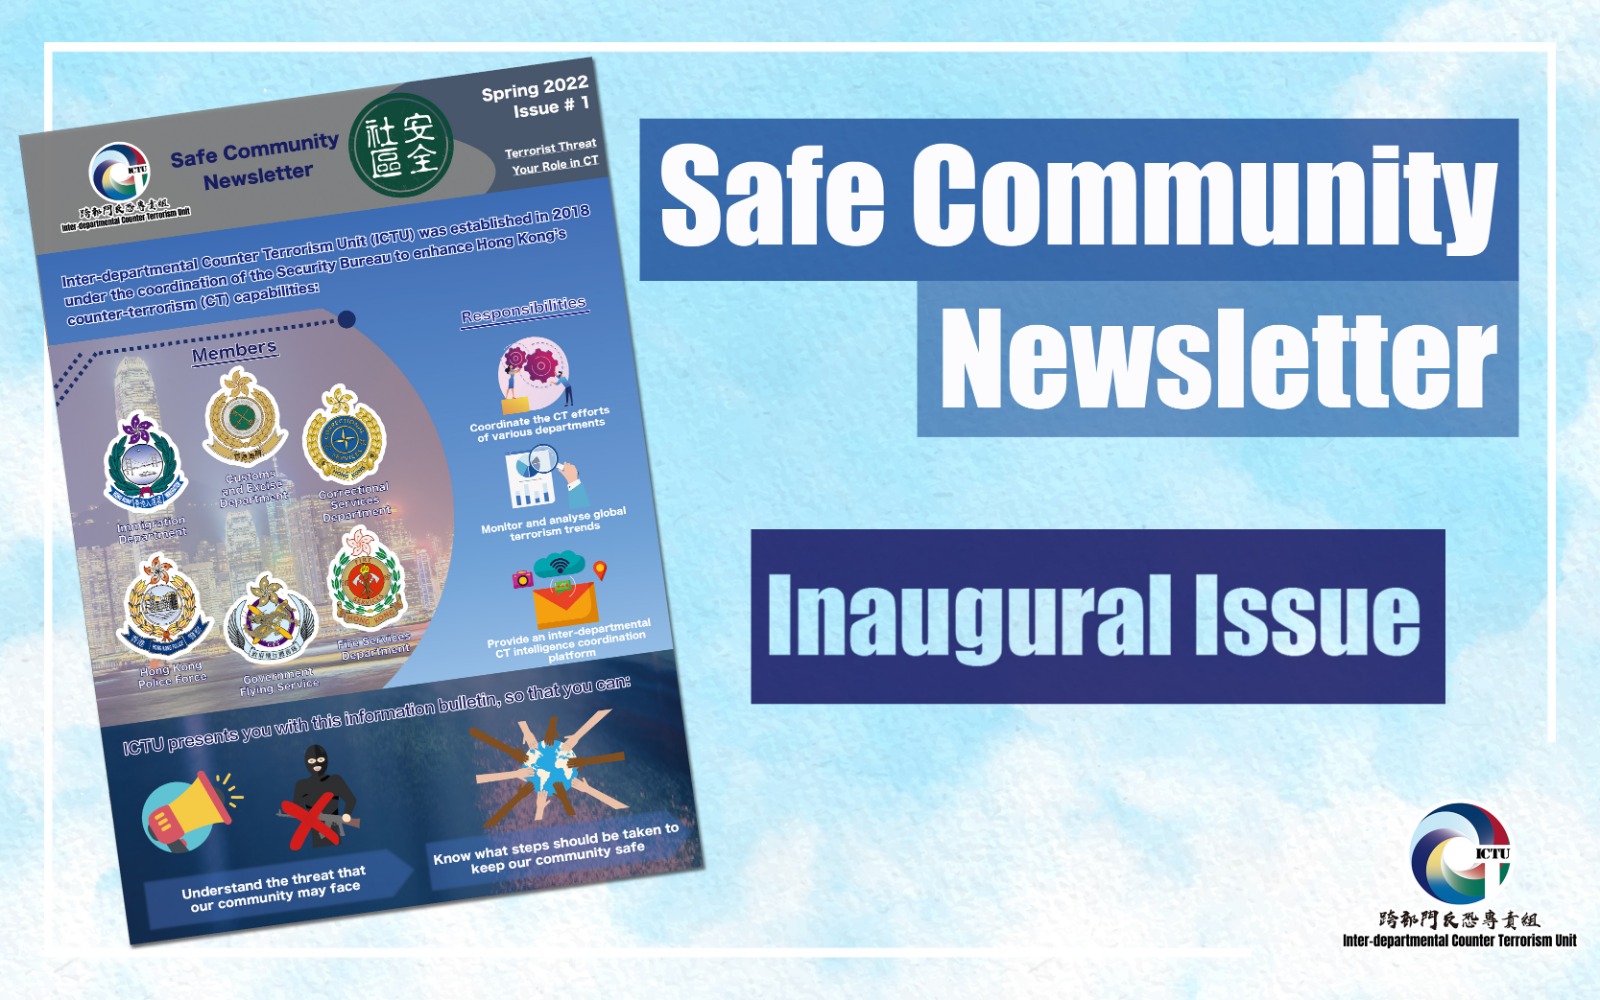 Inaugural Issue of “Safe Community Newsletter”